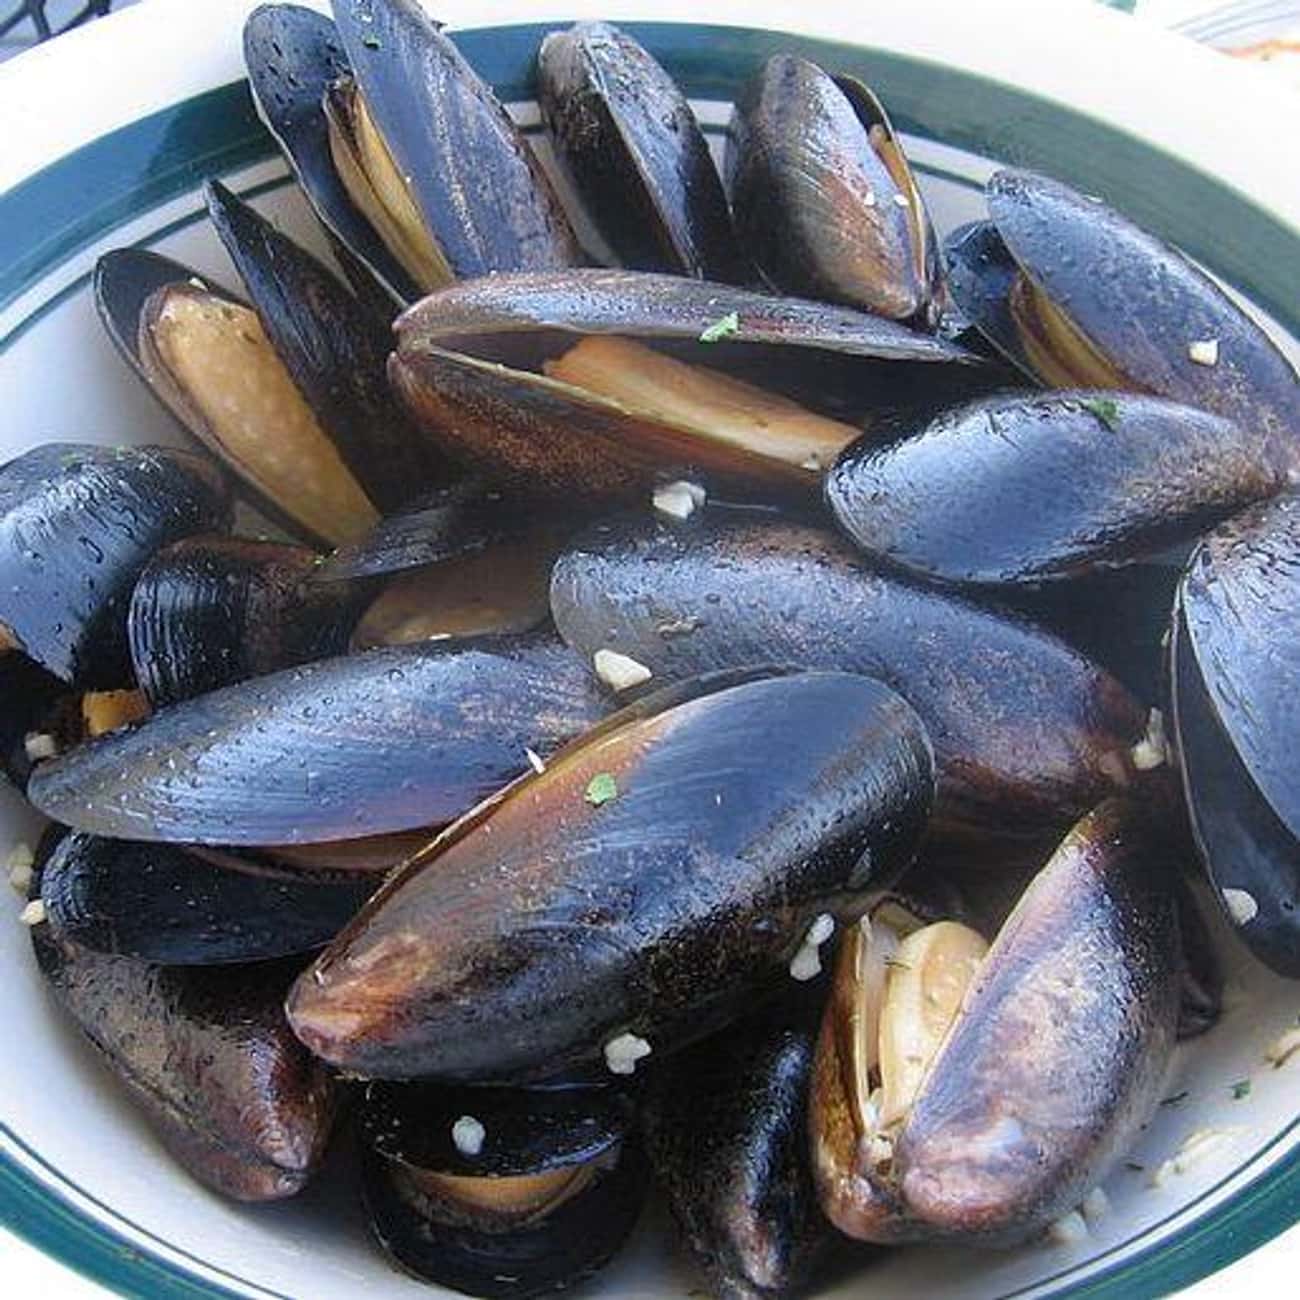 Mussels And Other Mollusks Contains Microplastics